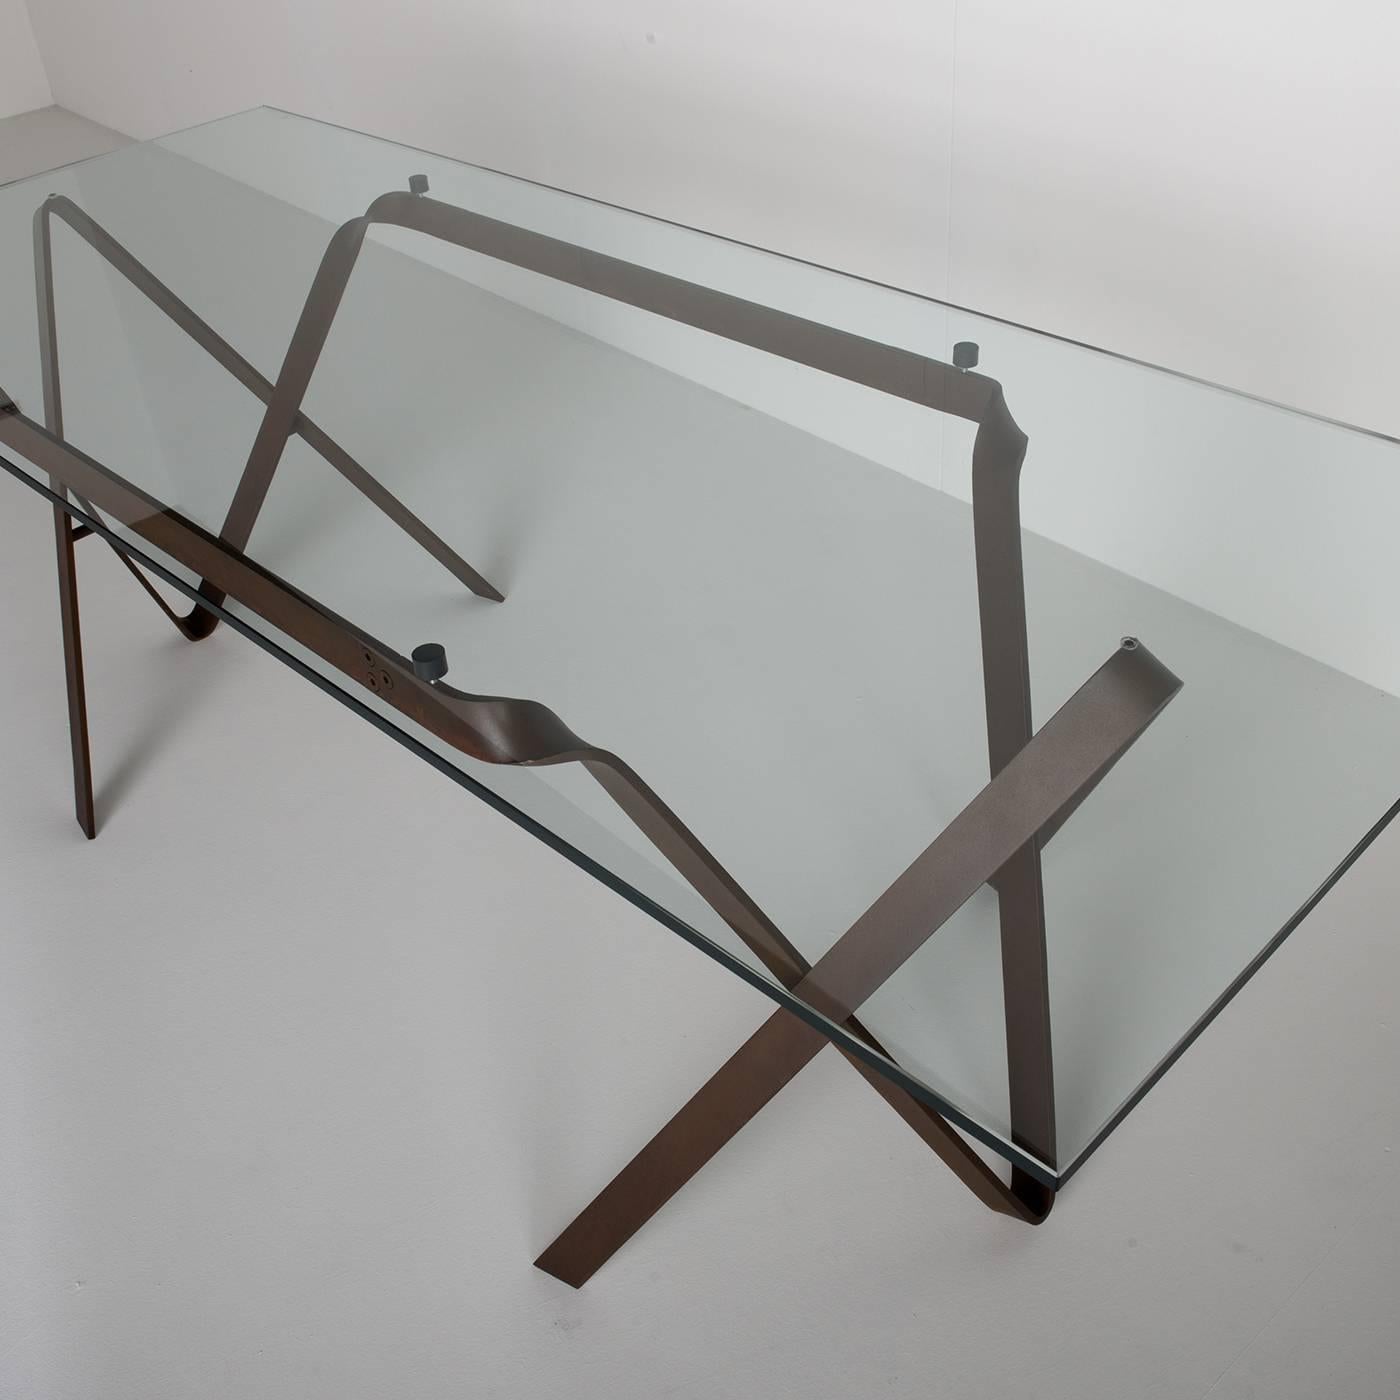 Harmoniously balancing a sculptural aesthetic and functionality, this boasts a rectangular top fashioned of extra clear, tempered glass seemingly floating atop a base made of crossed, hand-forged iron blades with a natural rust finish. This